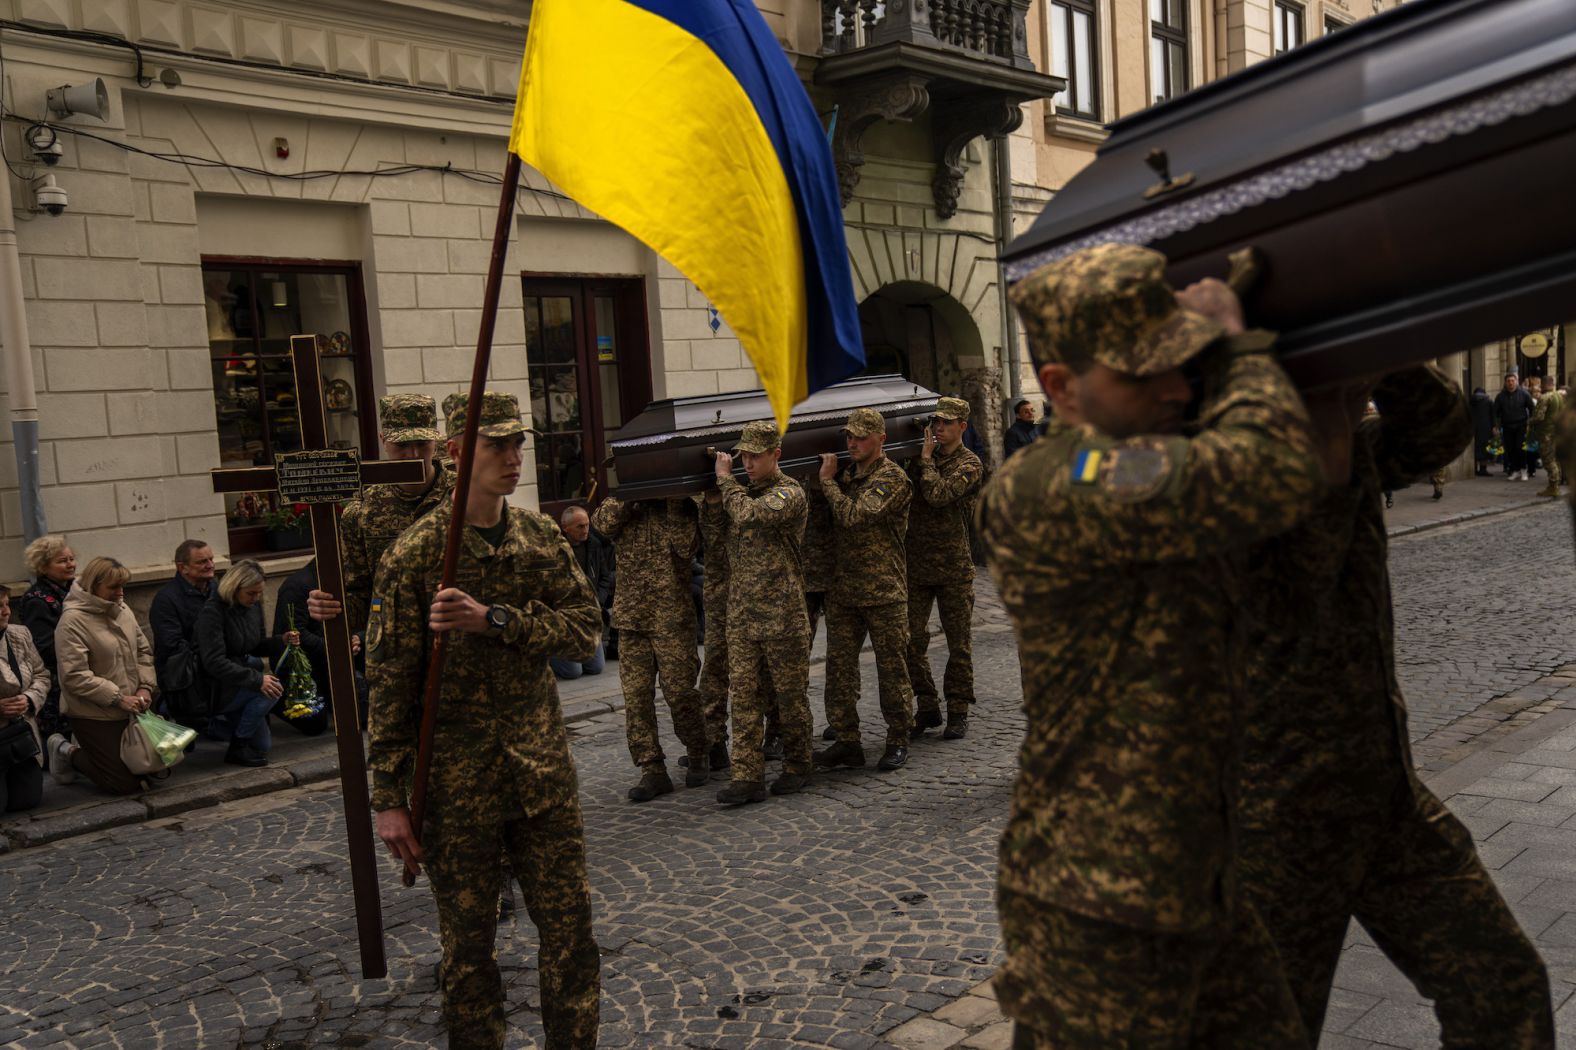 Soldiers carry the coffins of Ukrainian army sergeants Tomkevych Mykhailo and Kril Olexander during their funeral at the Saints Peter and Paul church in Lviv, Ukraine, on Tuesday, April 16.